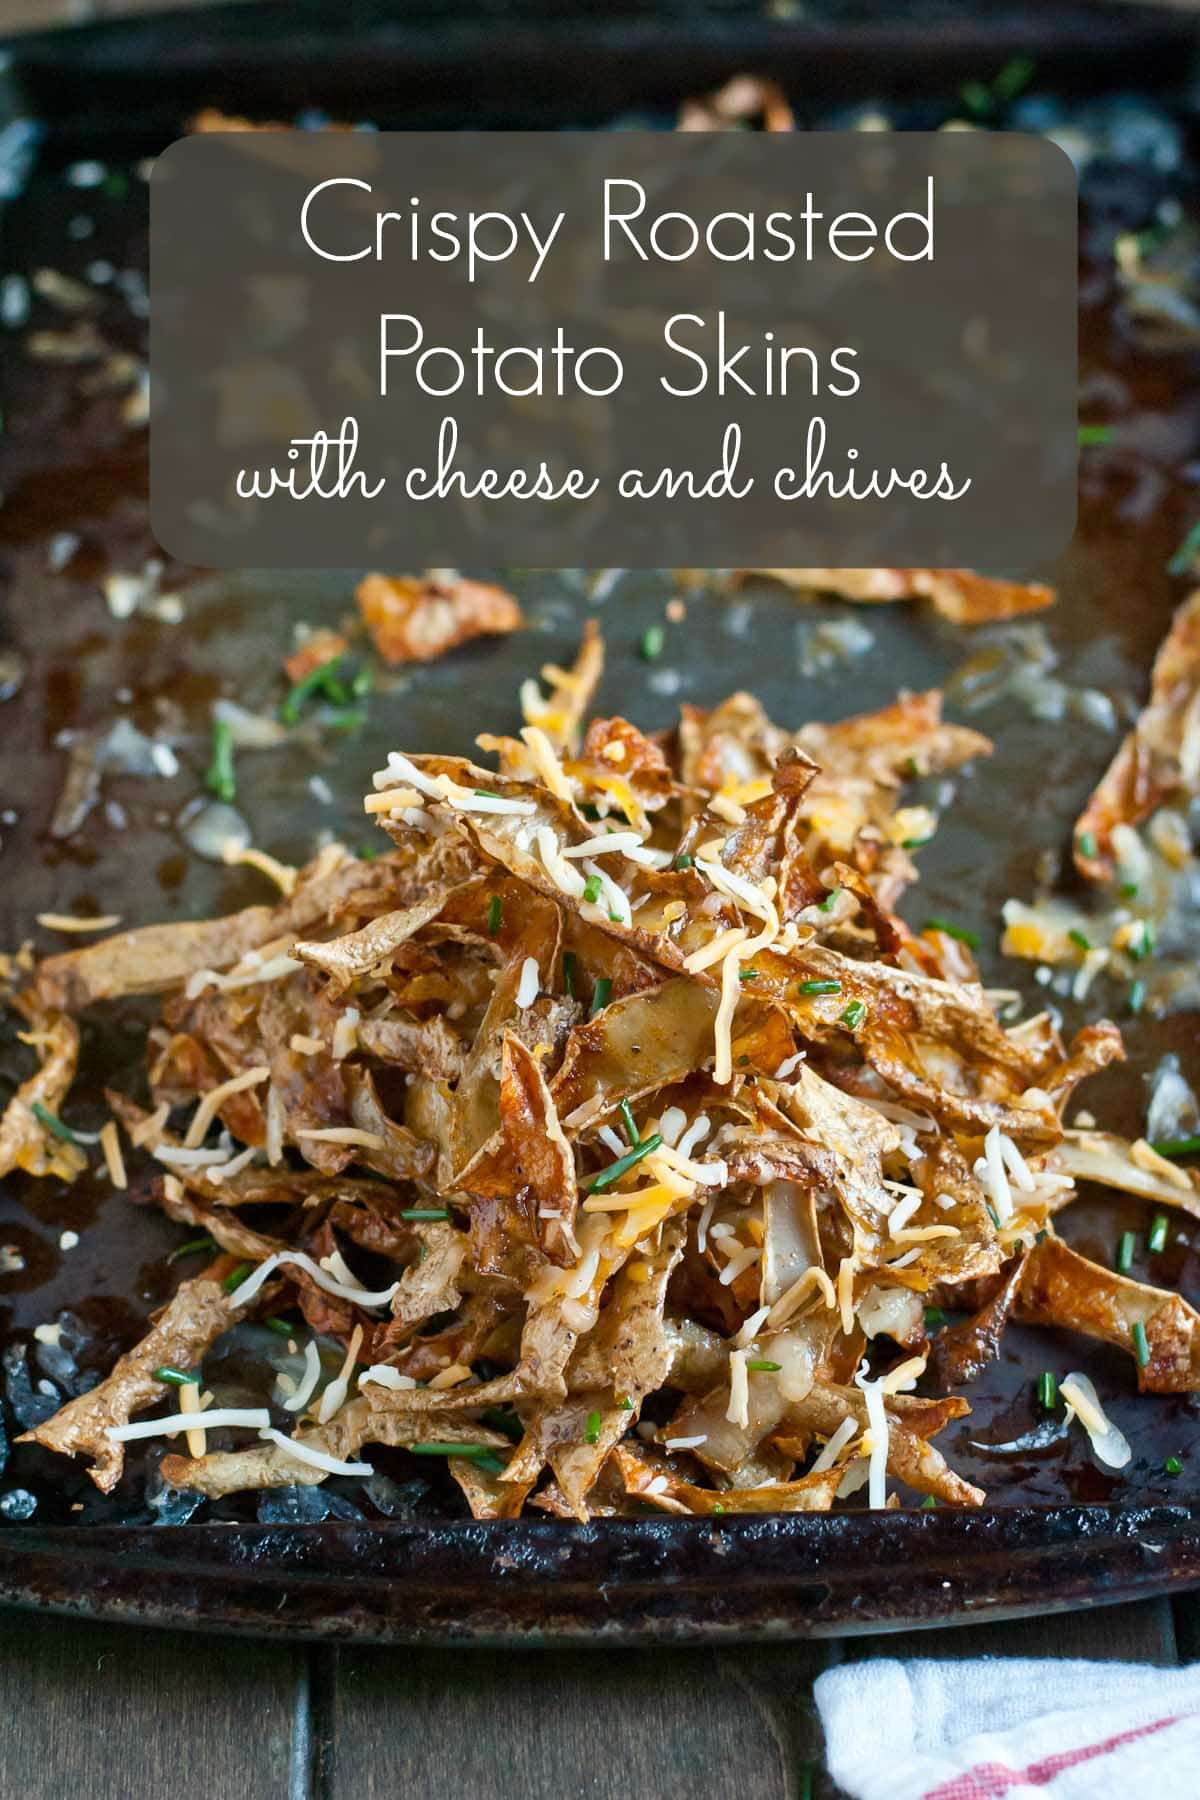 Never throw away potato peels again! These Crispy Roasted Potato Skins with cheese and chives are the perfect snack!